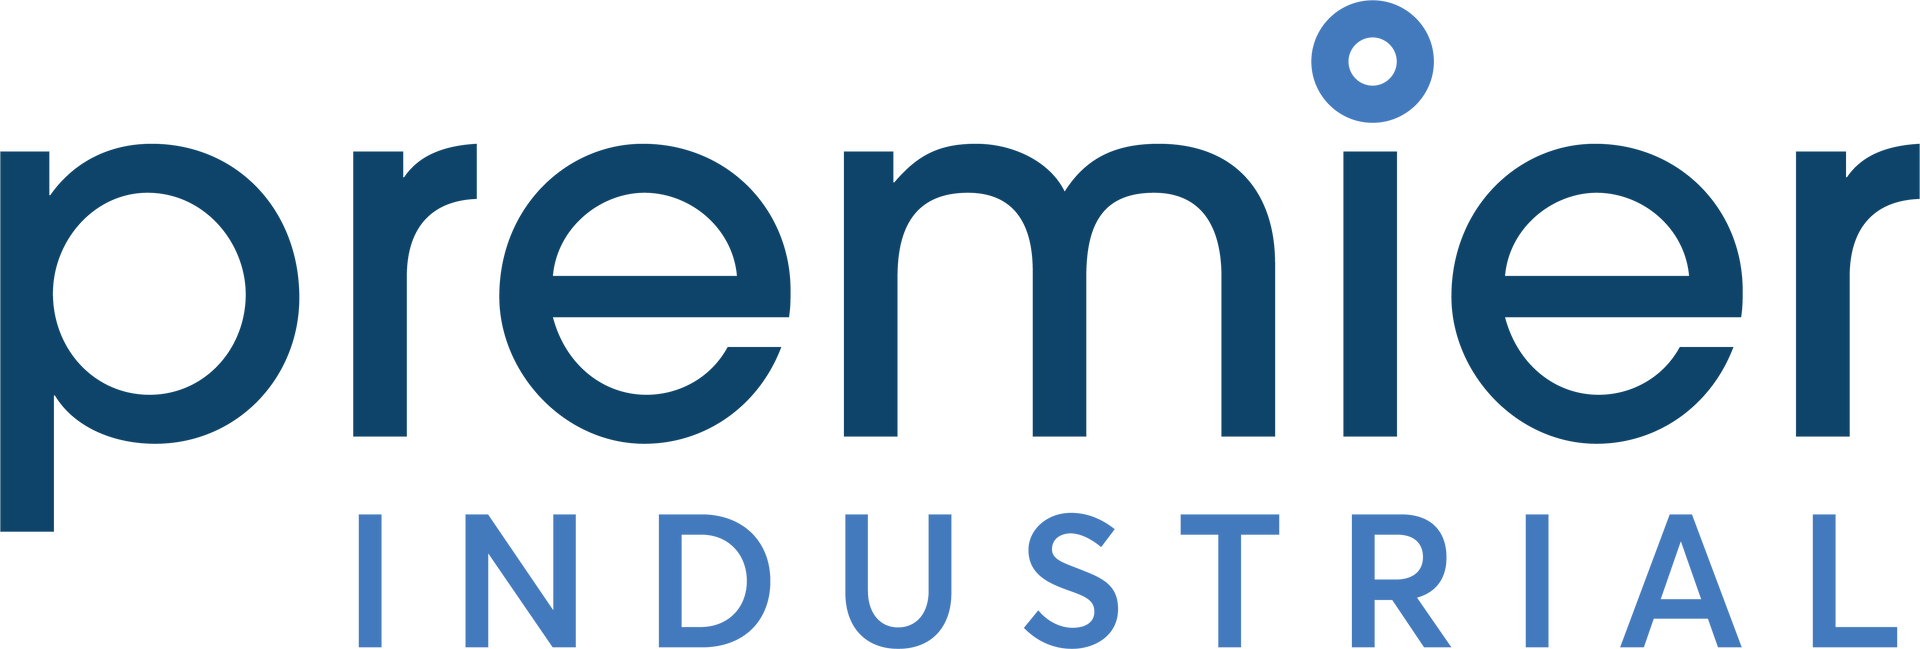 The premier industrial logo is blue and white on a white background.